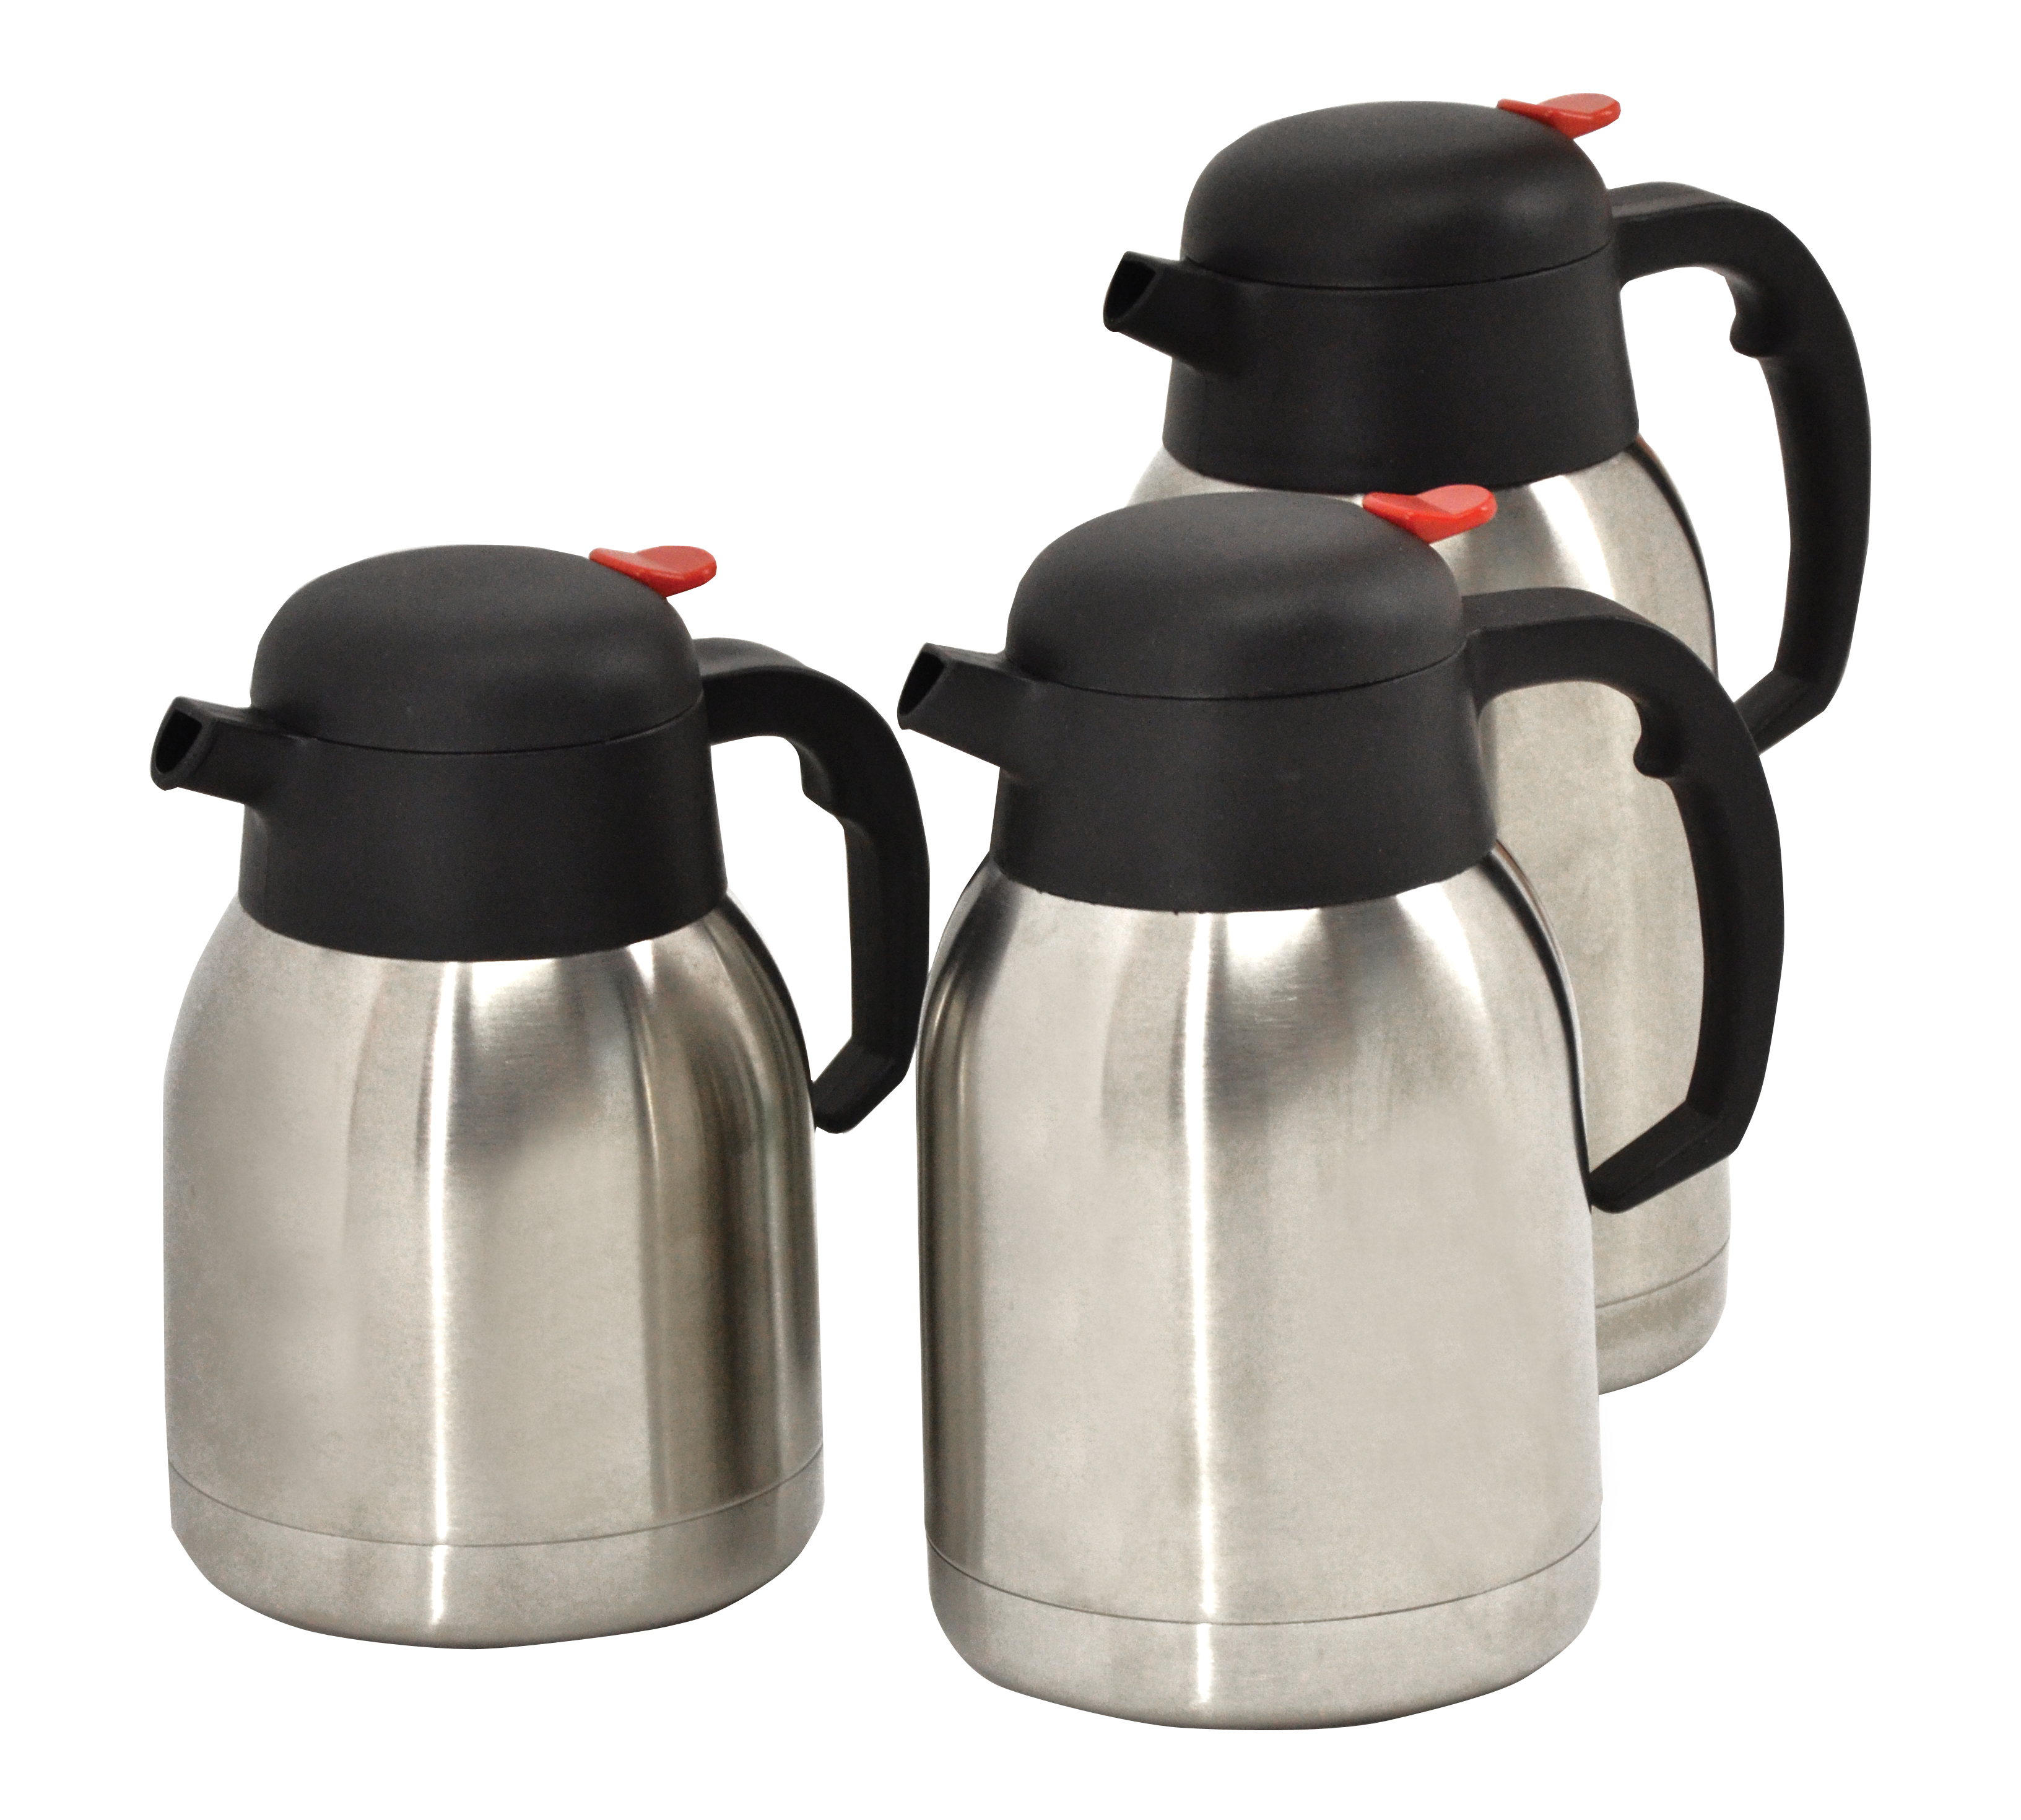 Coffmax 68 Oz/2 Liter Insulated Thermal Coffee Carafe Pitcher - Stainless Steel Double Walled Vacuum Thermos Server Pot â